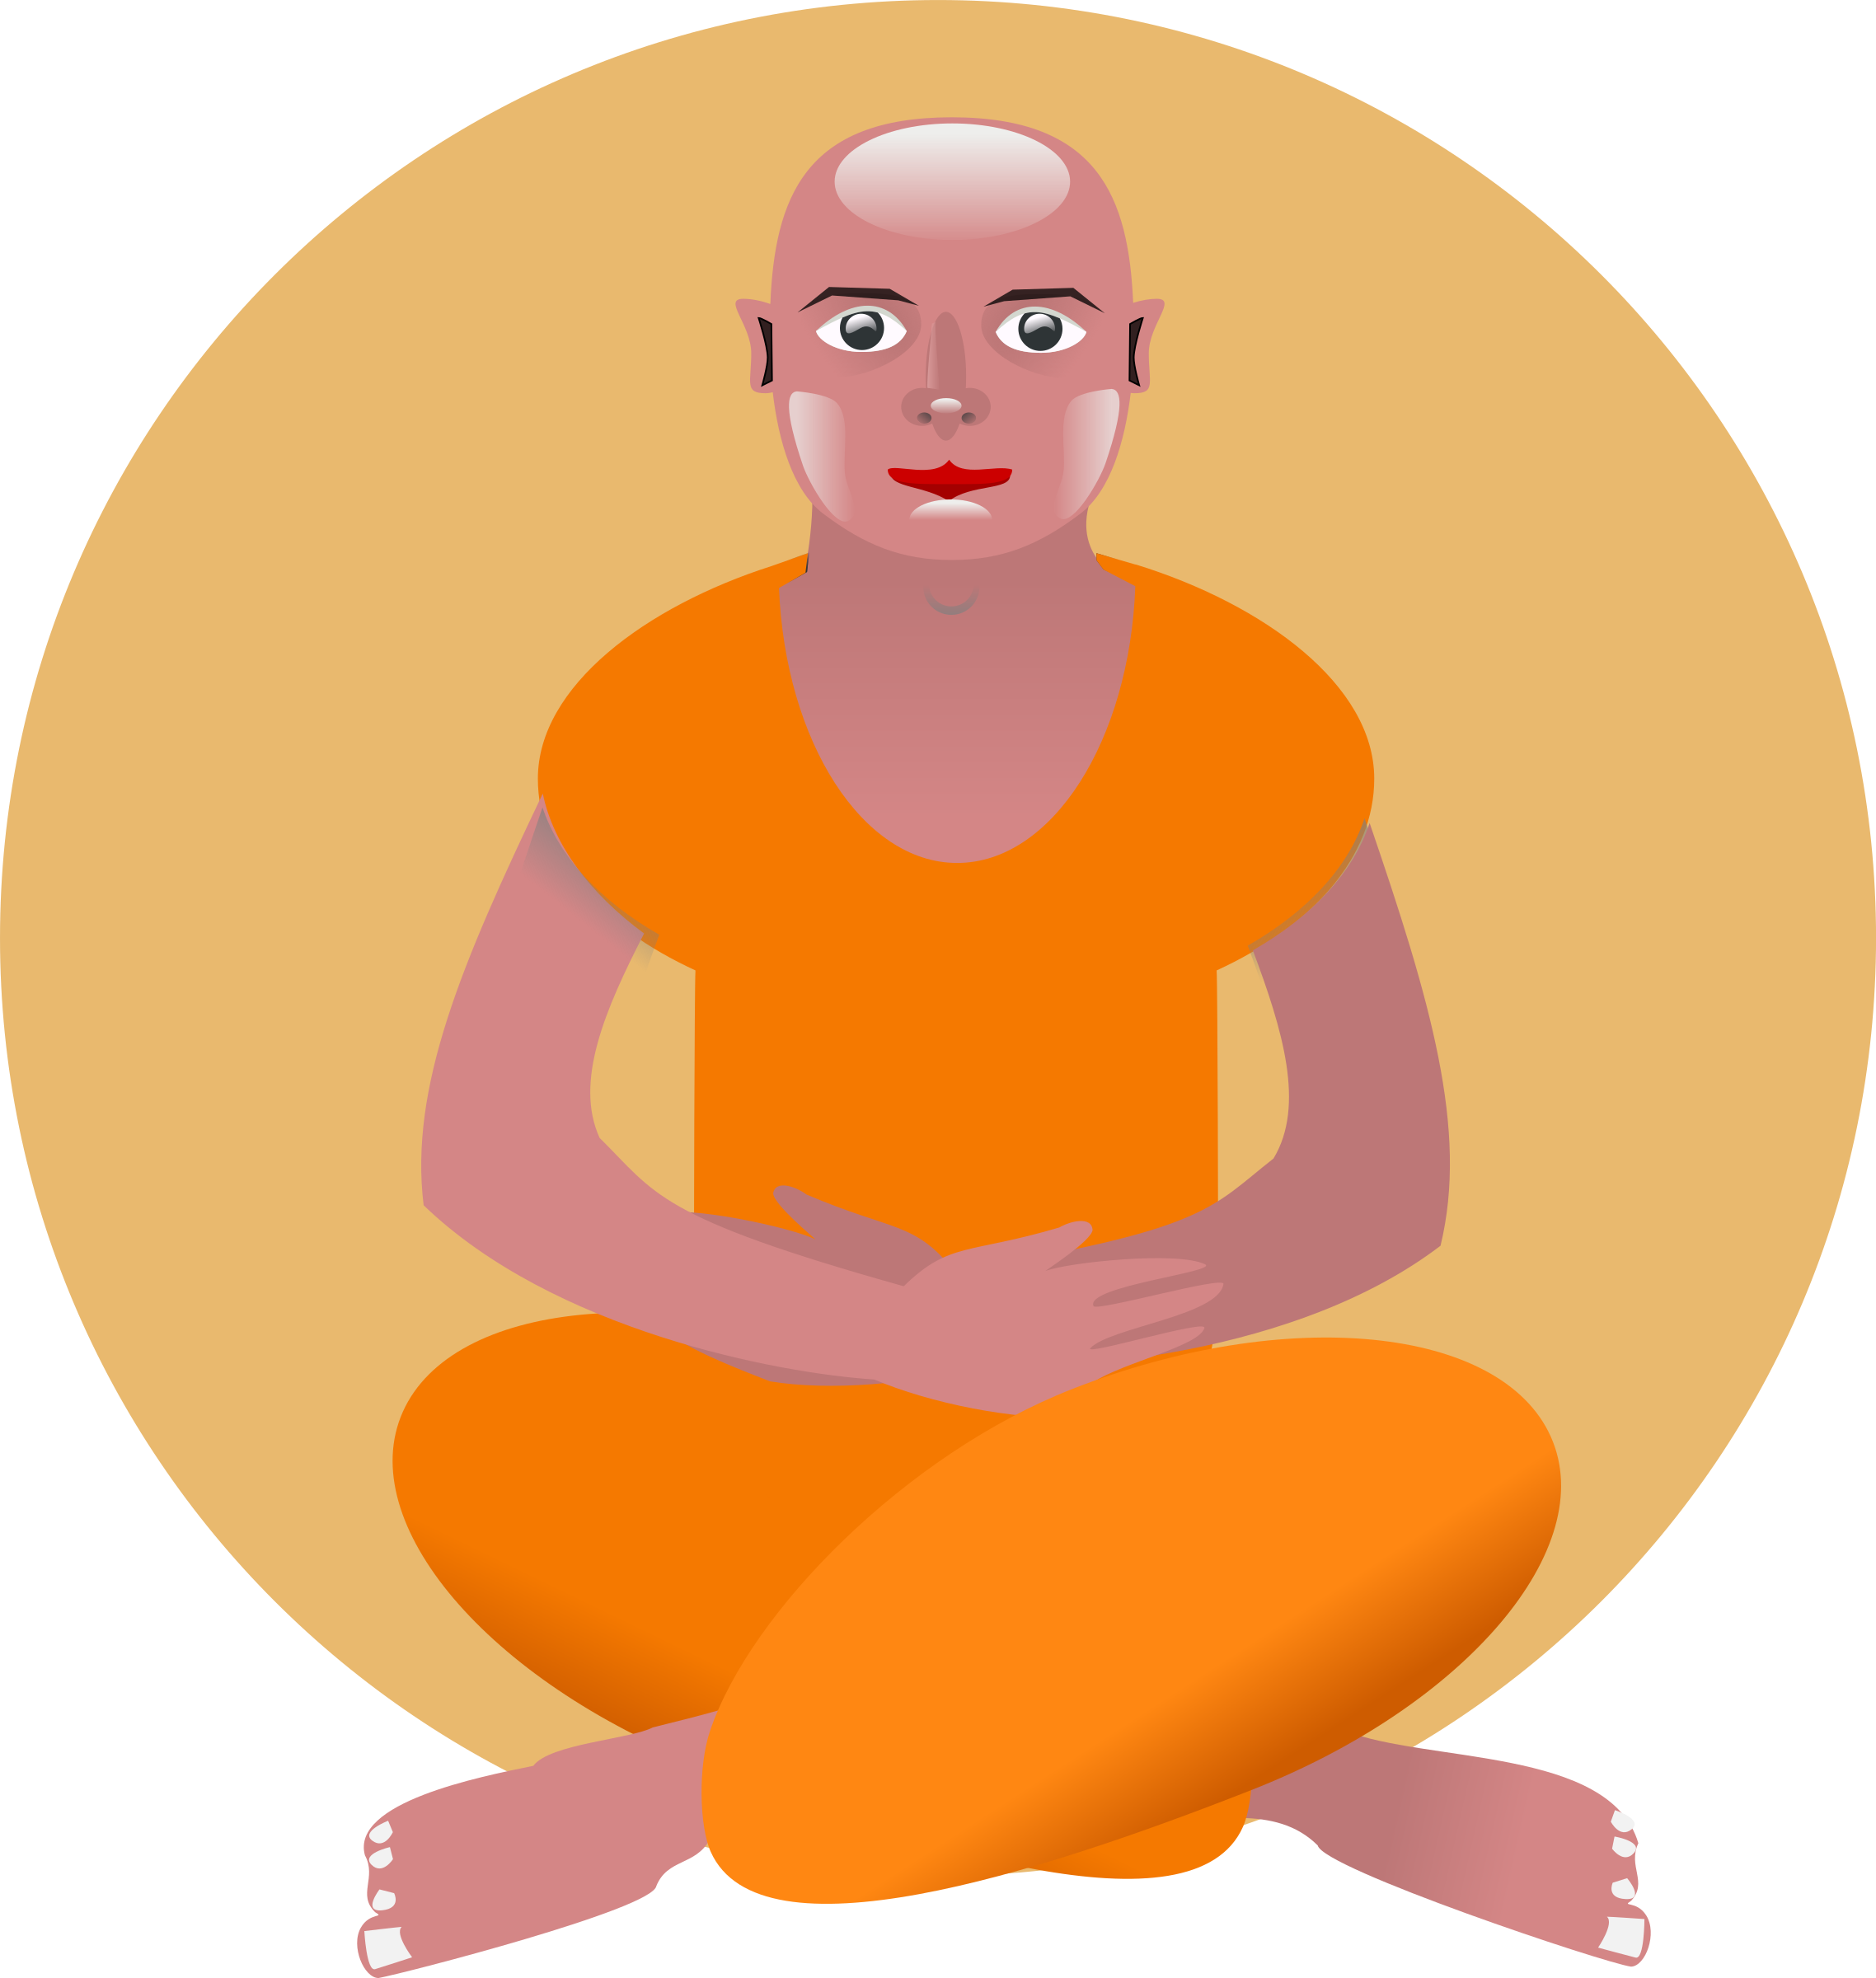 Icons png free and. Meditation clipart mental fitness